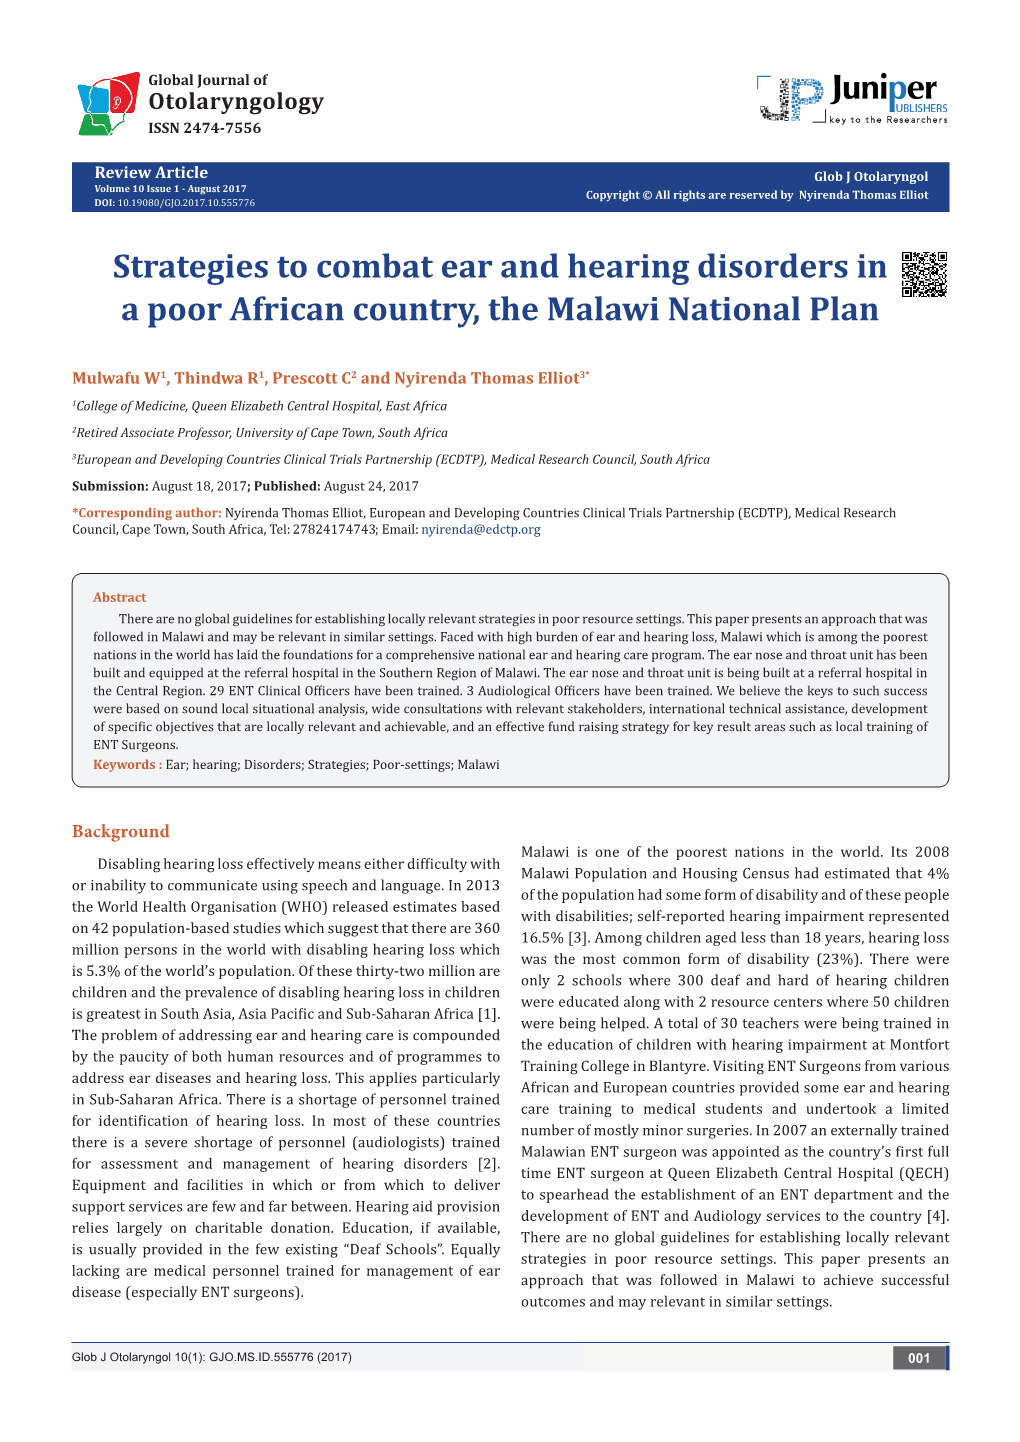 Strategies to Combat Ear and Hearing Disorders in a Poor African Country, the Malawi National Plan